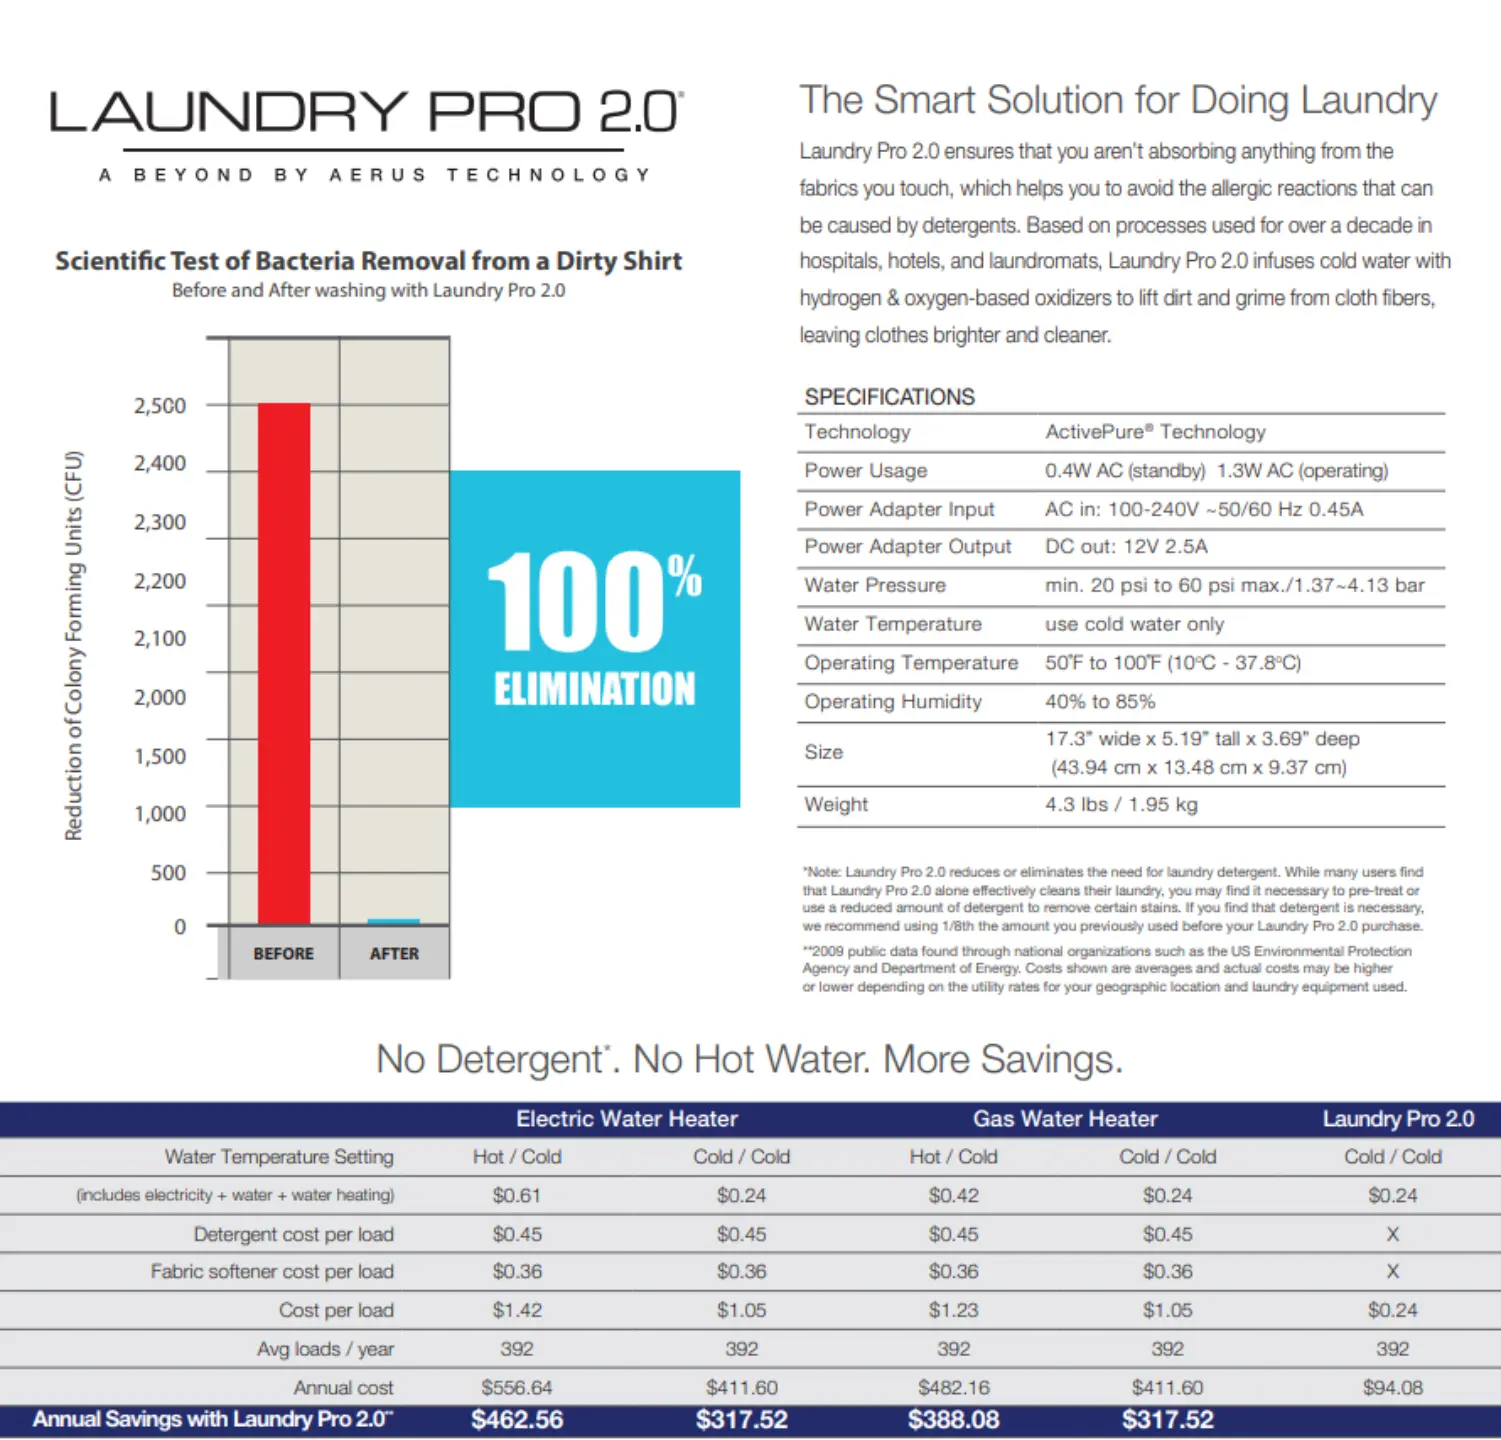 A screen shot of a laundry product